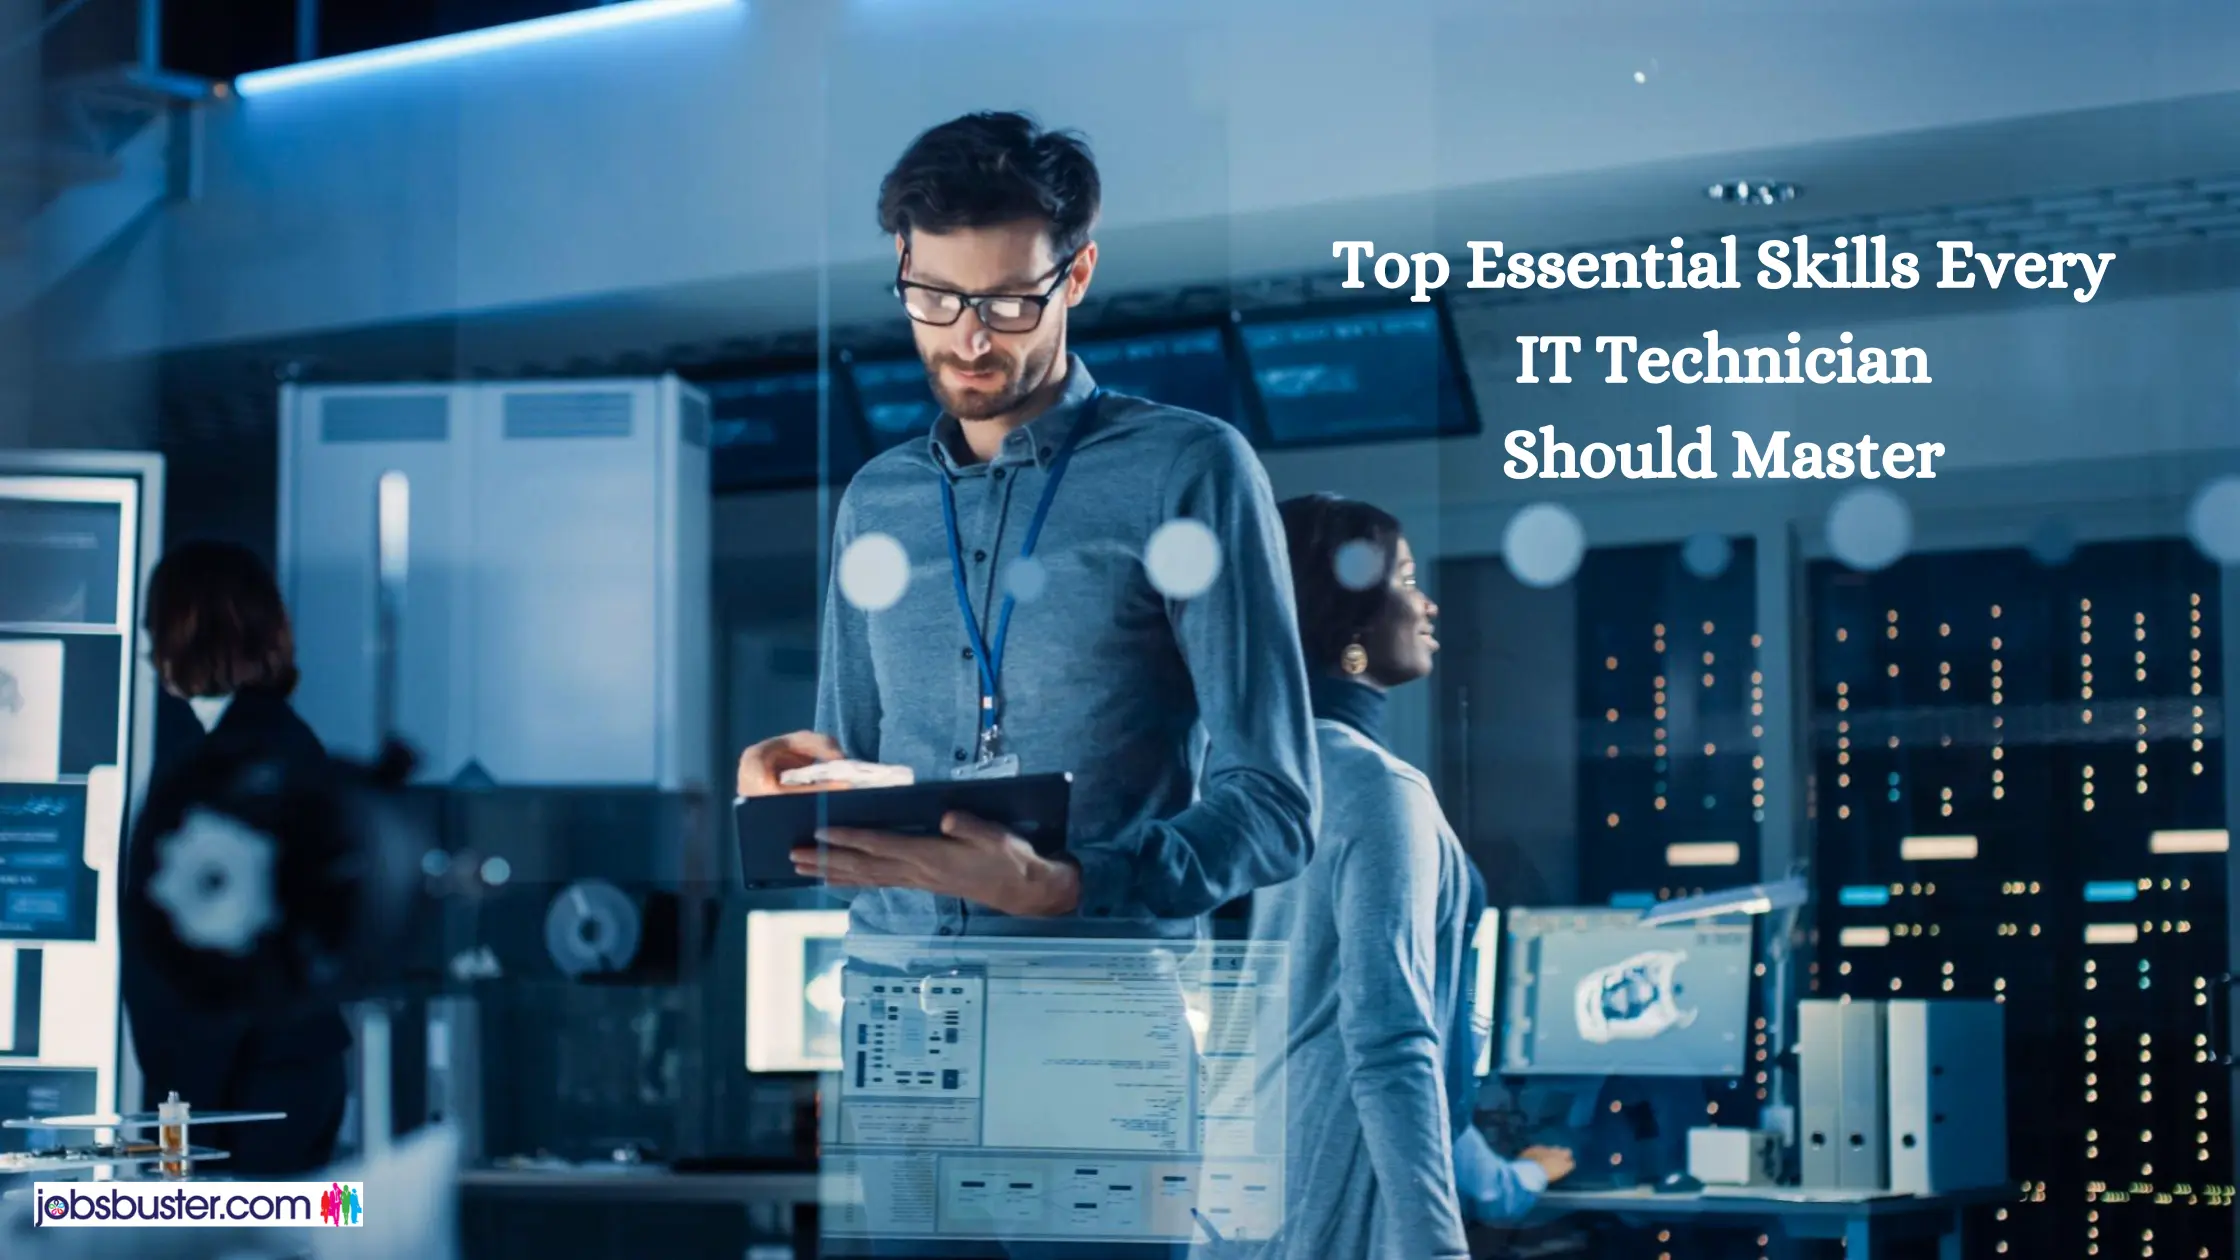 Top Essential Skills Every IT Technician Should Master